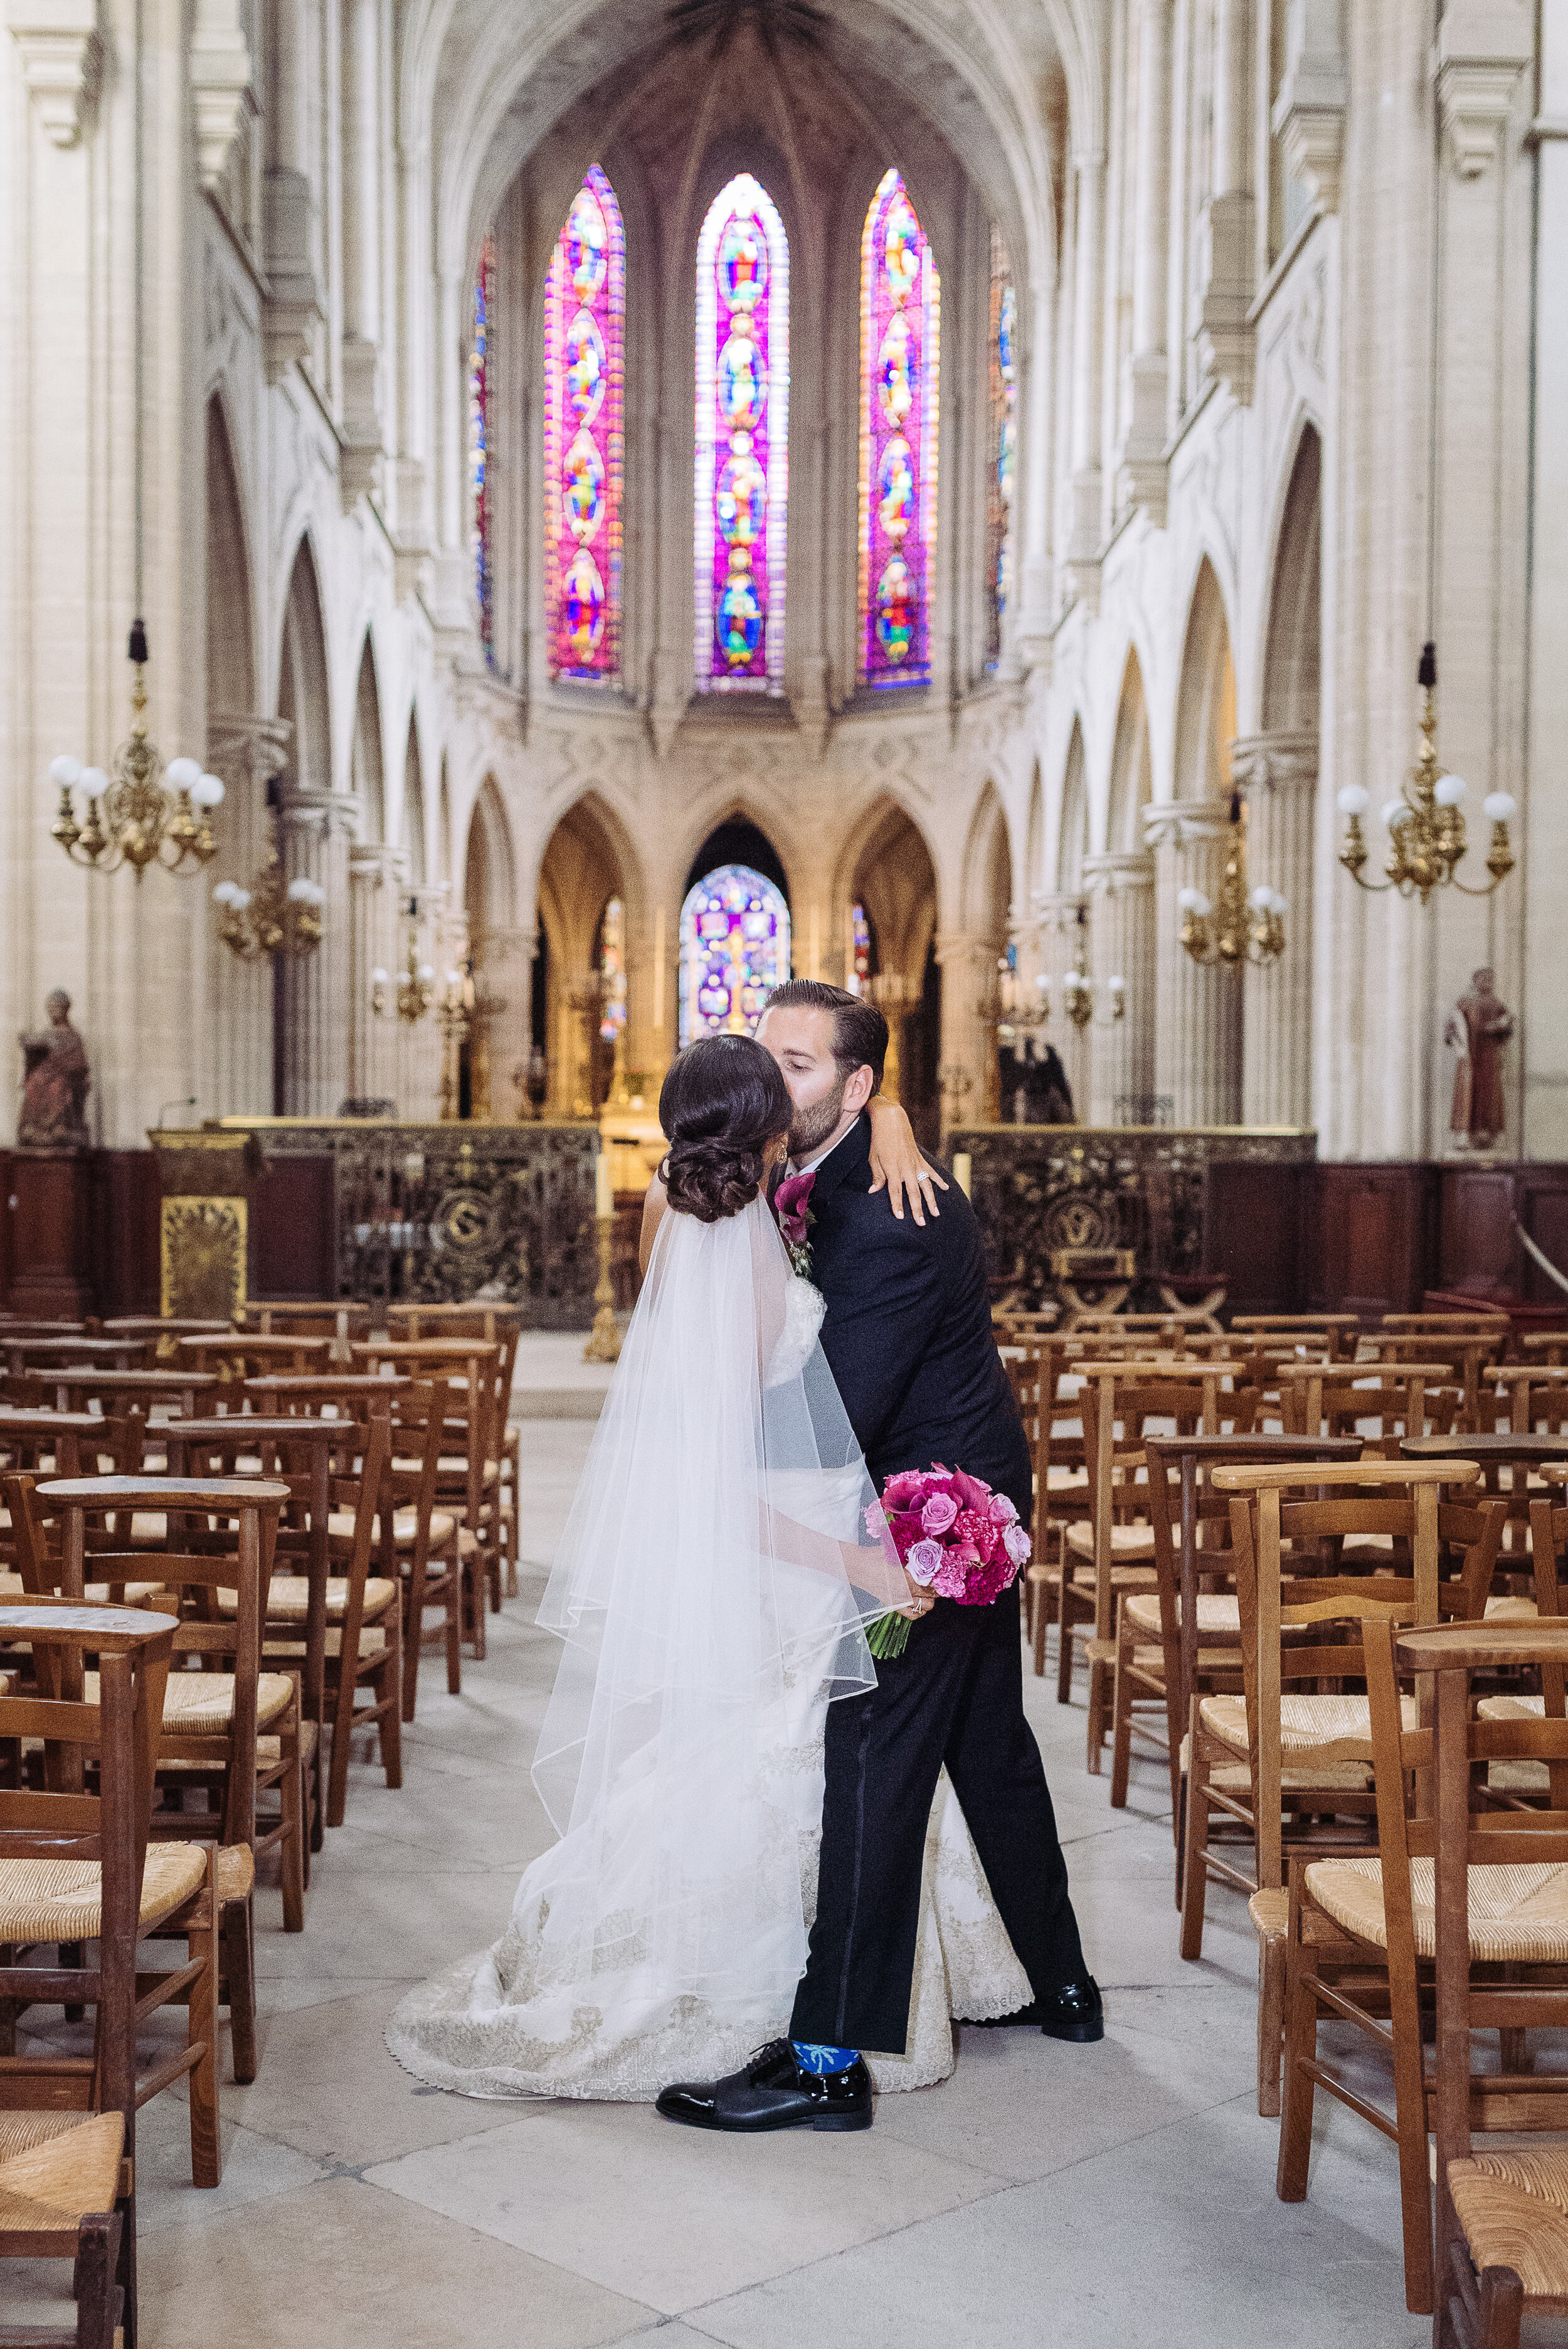 Destination Wedding at the American Church in Paris, Kiss at the Alter, Makeup and Hairstyling by Onorina Jomir Beauty, Paris, France.